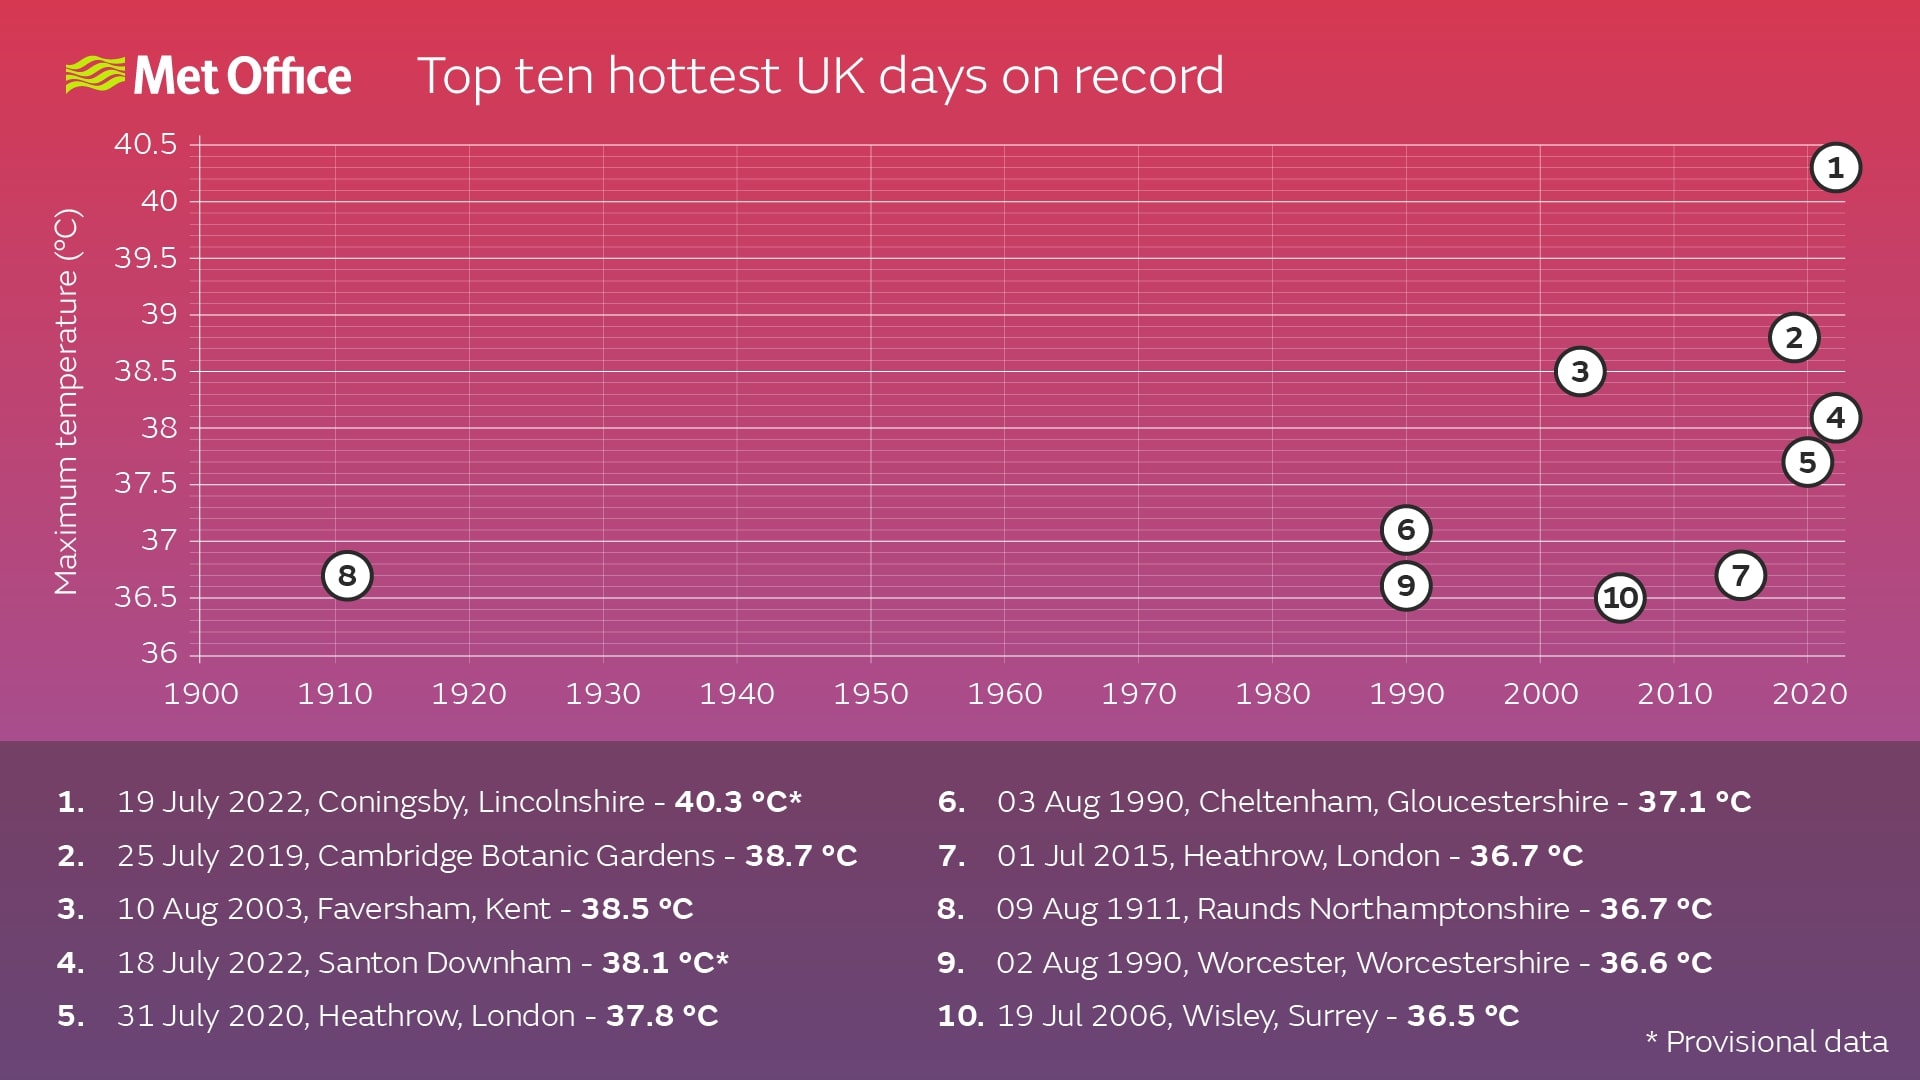 Top 10 hottest days